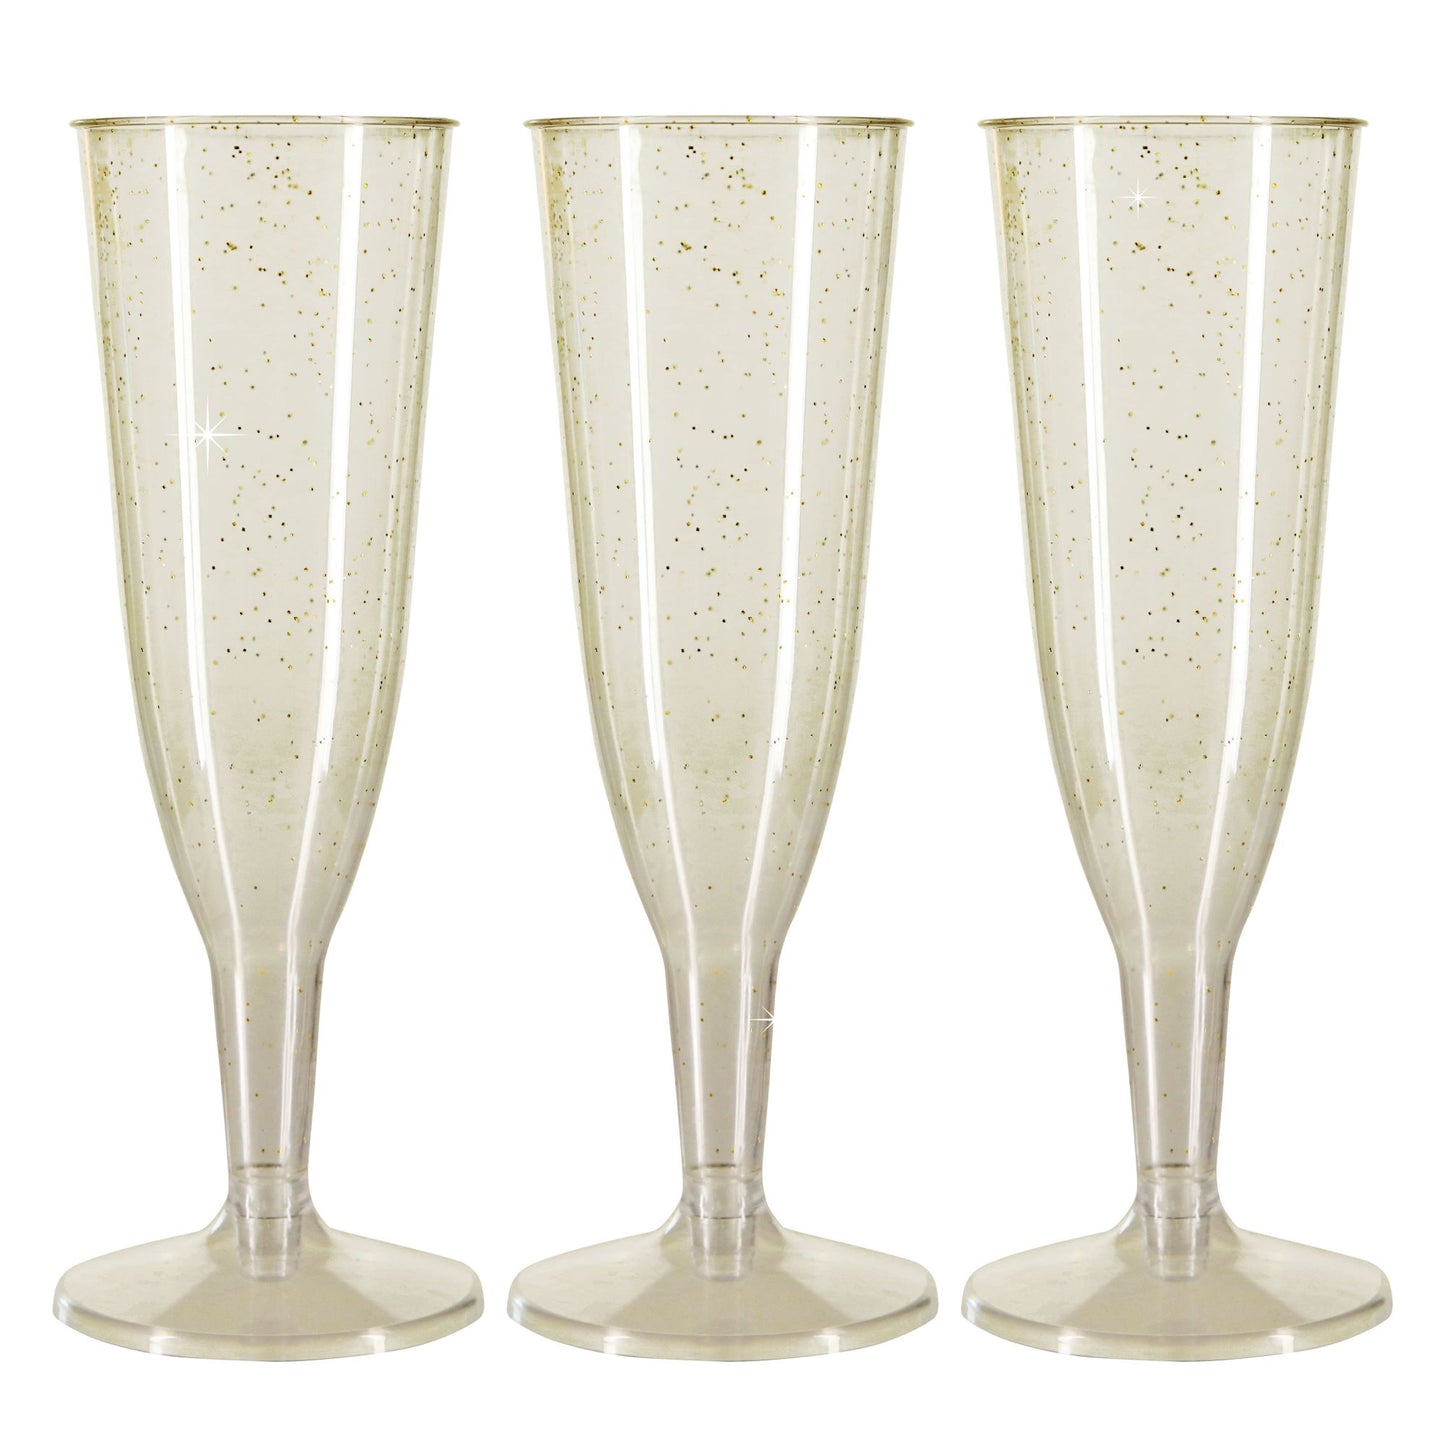 6 x Gold Glitter Prosecco Flutes - Disposable, Recyclable Polystyrene Material - Transparent 2-Piece Champagne Glasses Parties Celebrations-5056020179740-PCUP-CHAMP2p-GG-10-Product Pro-Champagne Glasses, Clear Champagne Glasses, Gold Glitter, Plastic Flutes, Prosecco Flutes